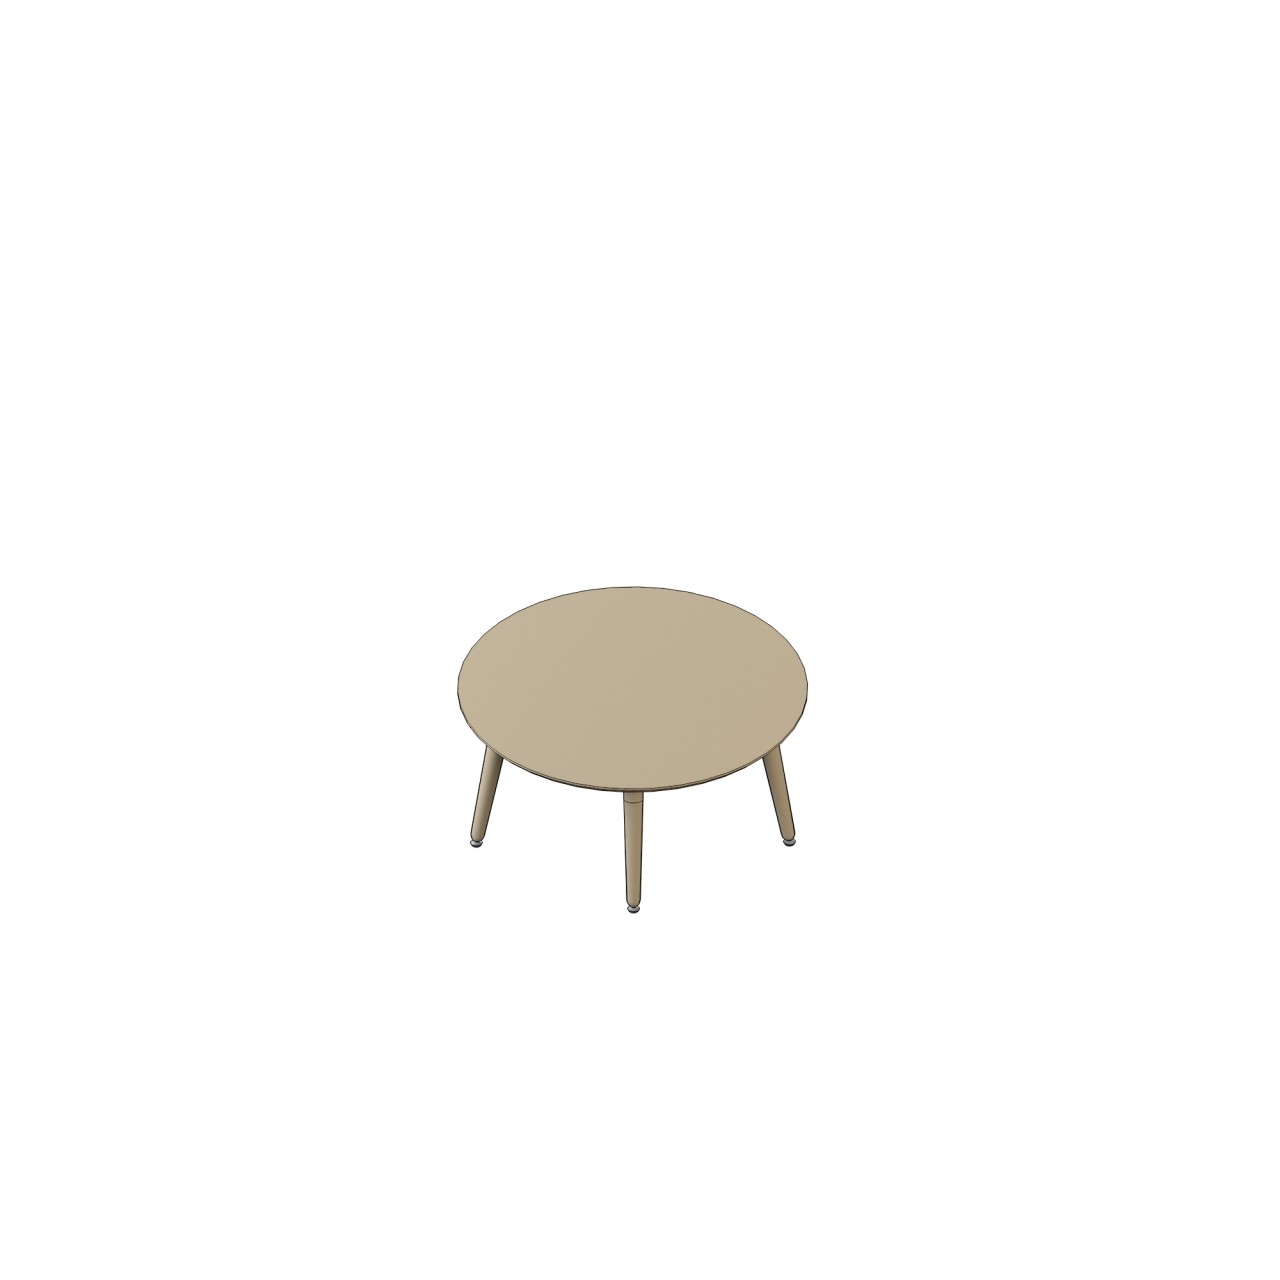 madmen tables - MM-6
coffee table, round